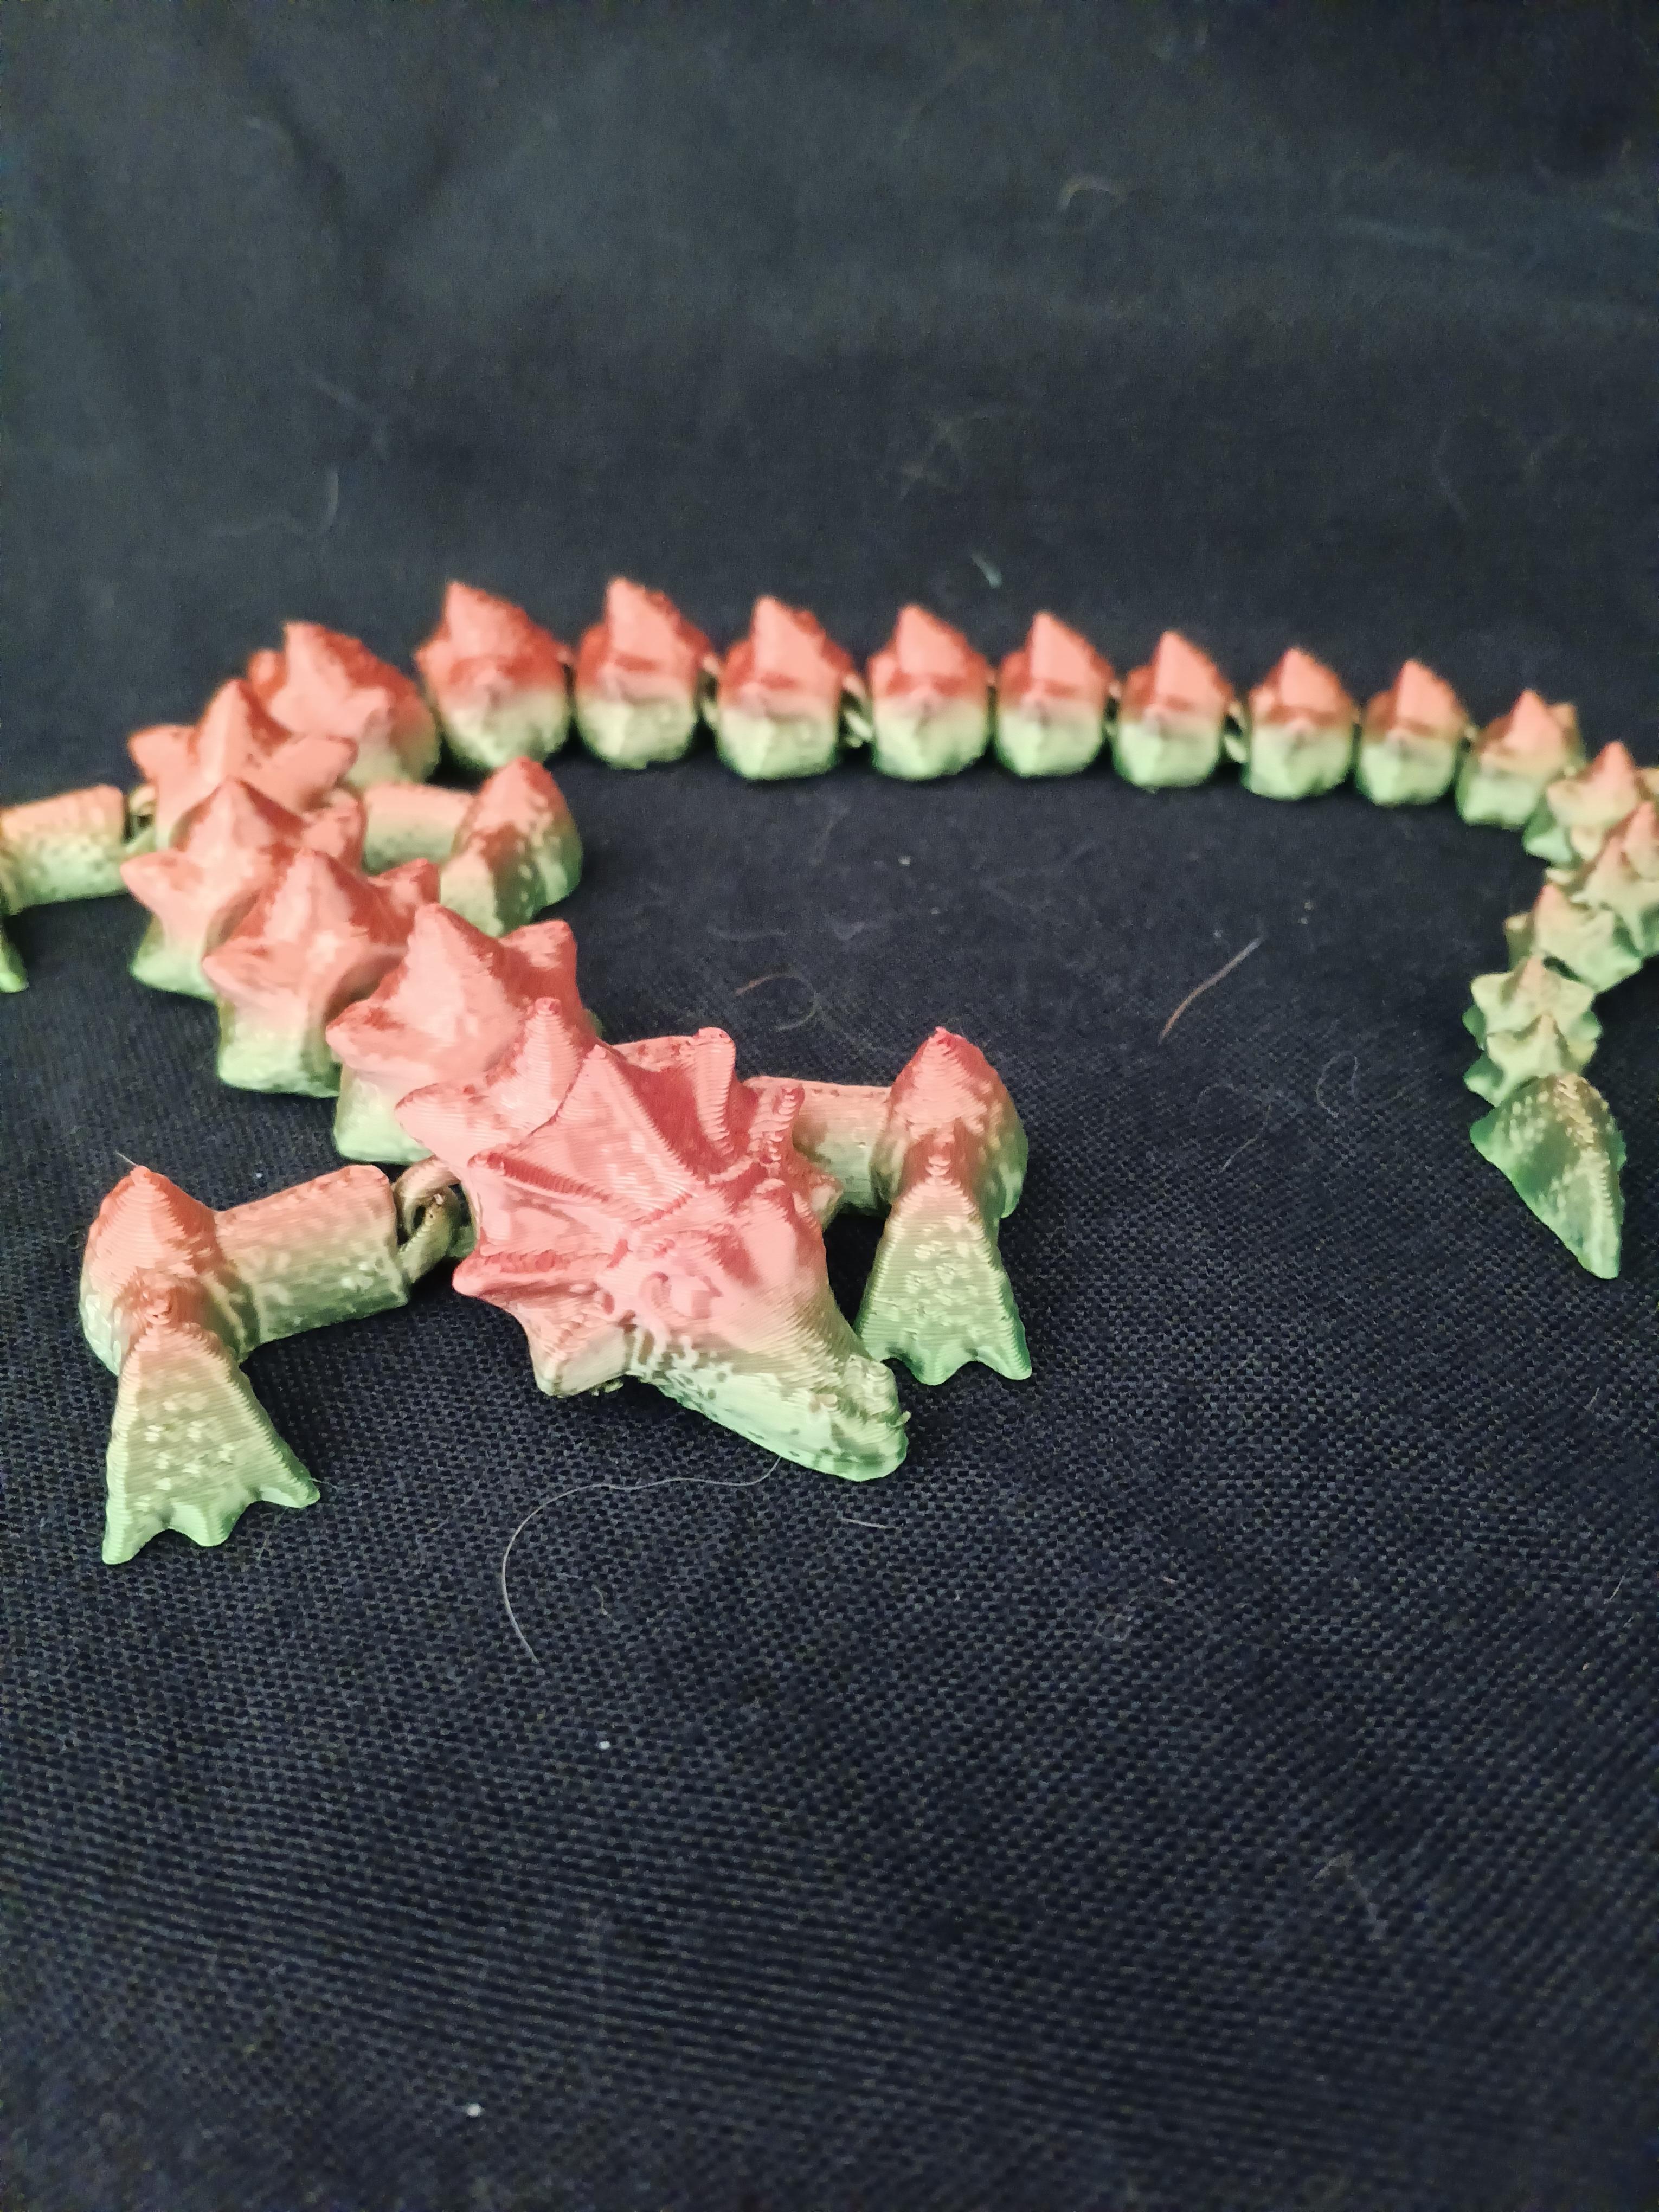 New articulated dragon is up on my page